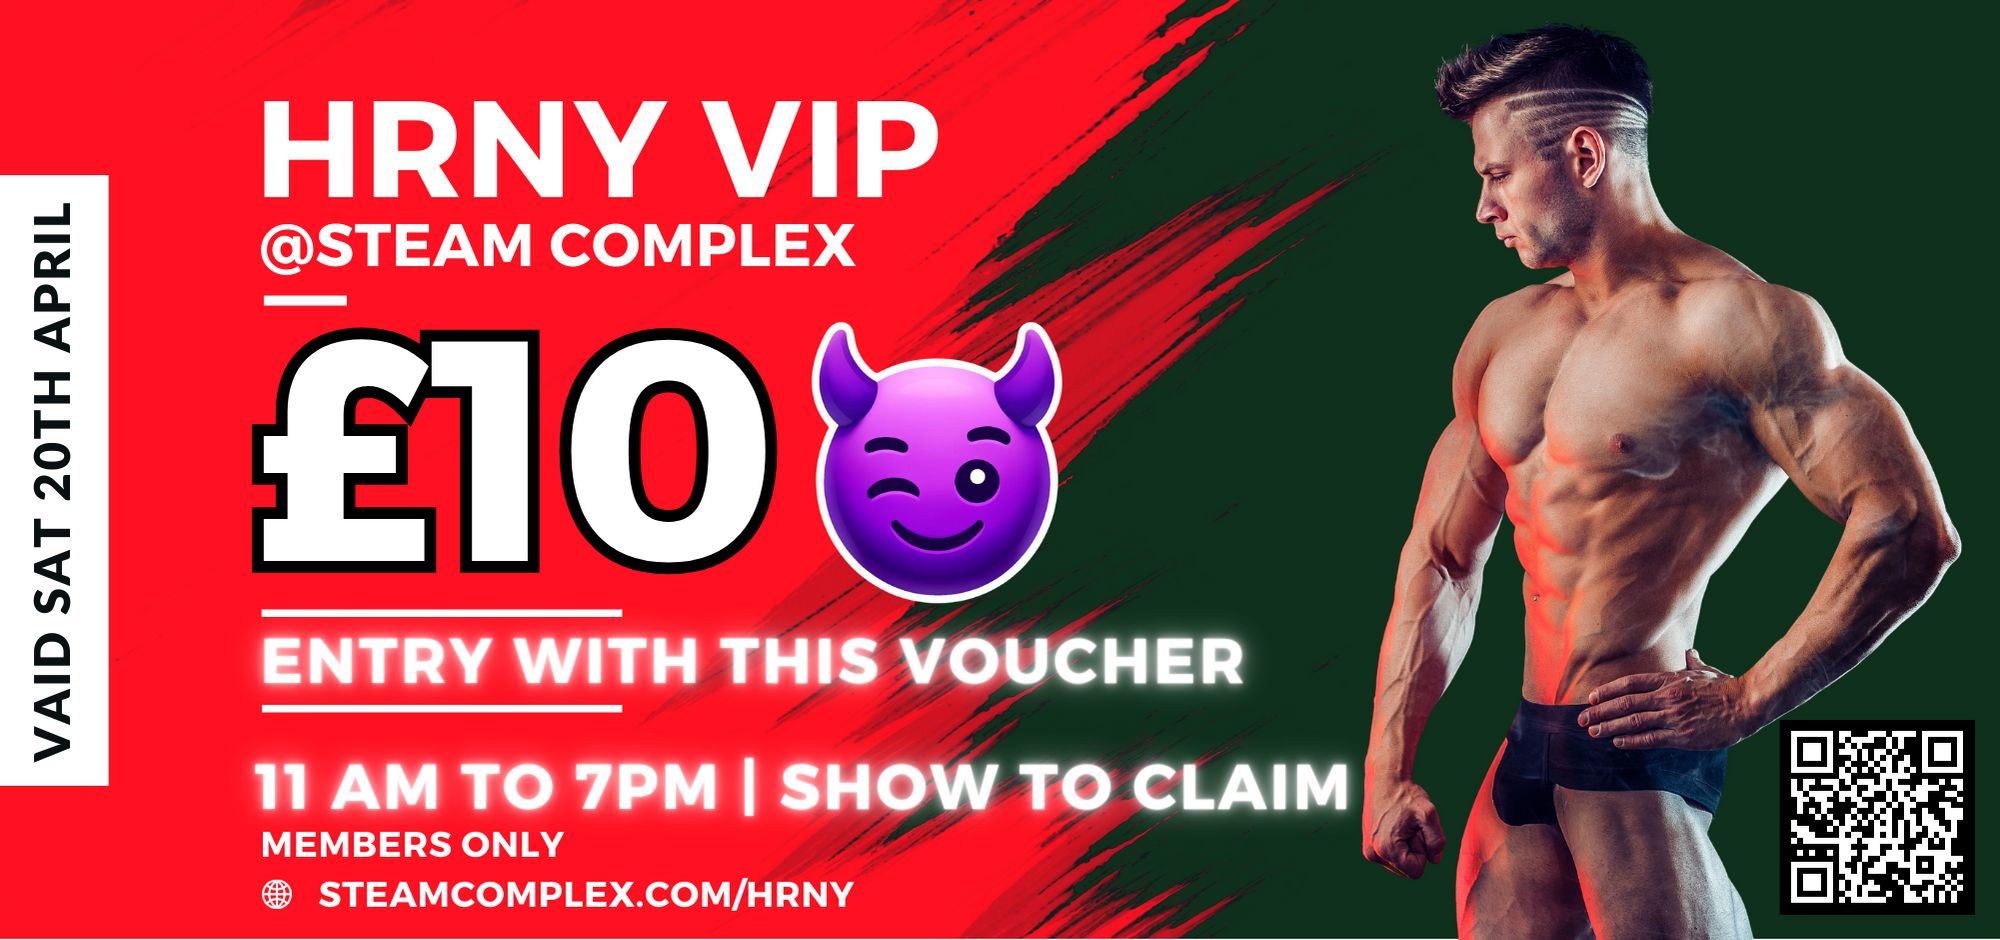 hrny event at steam complex vip entry voucher